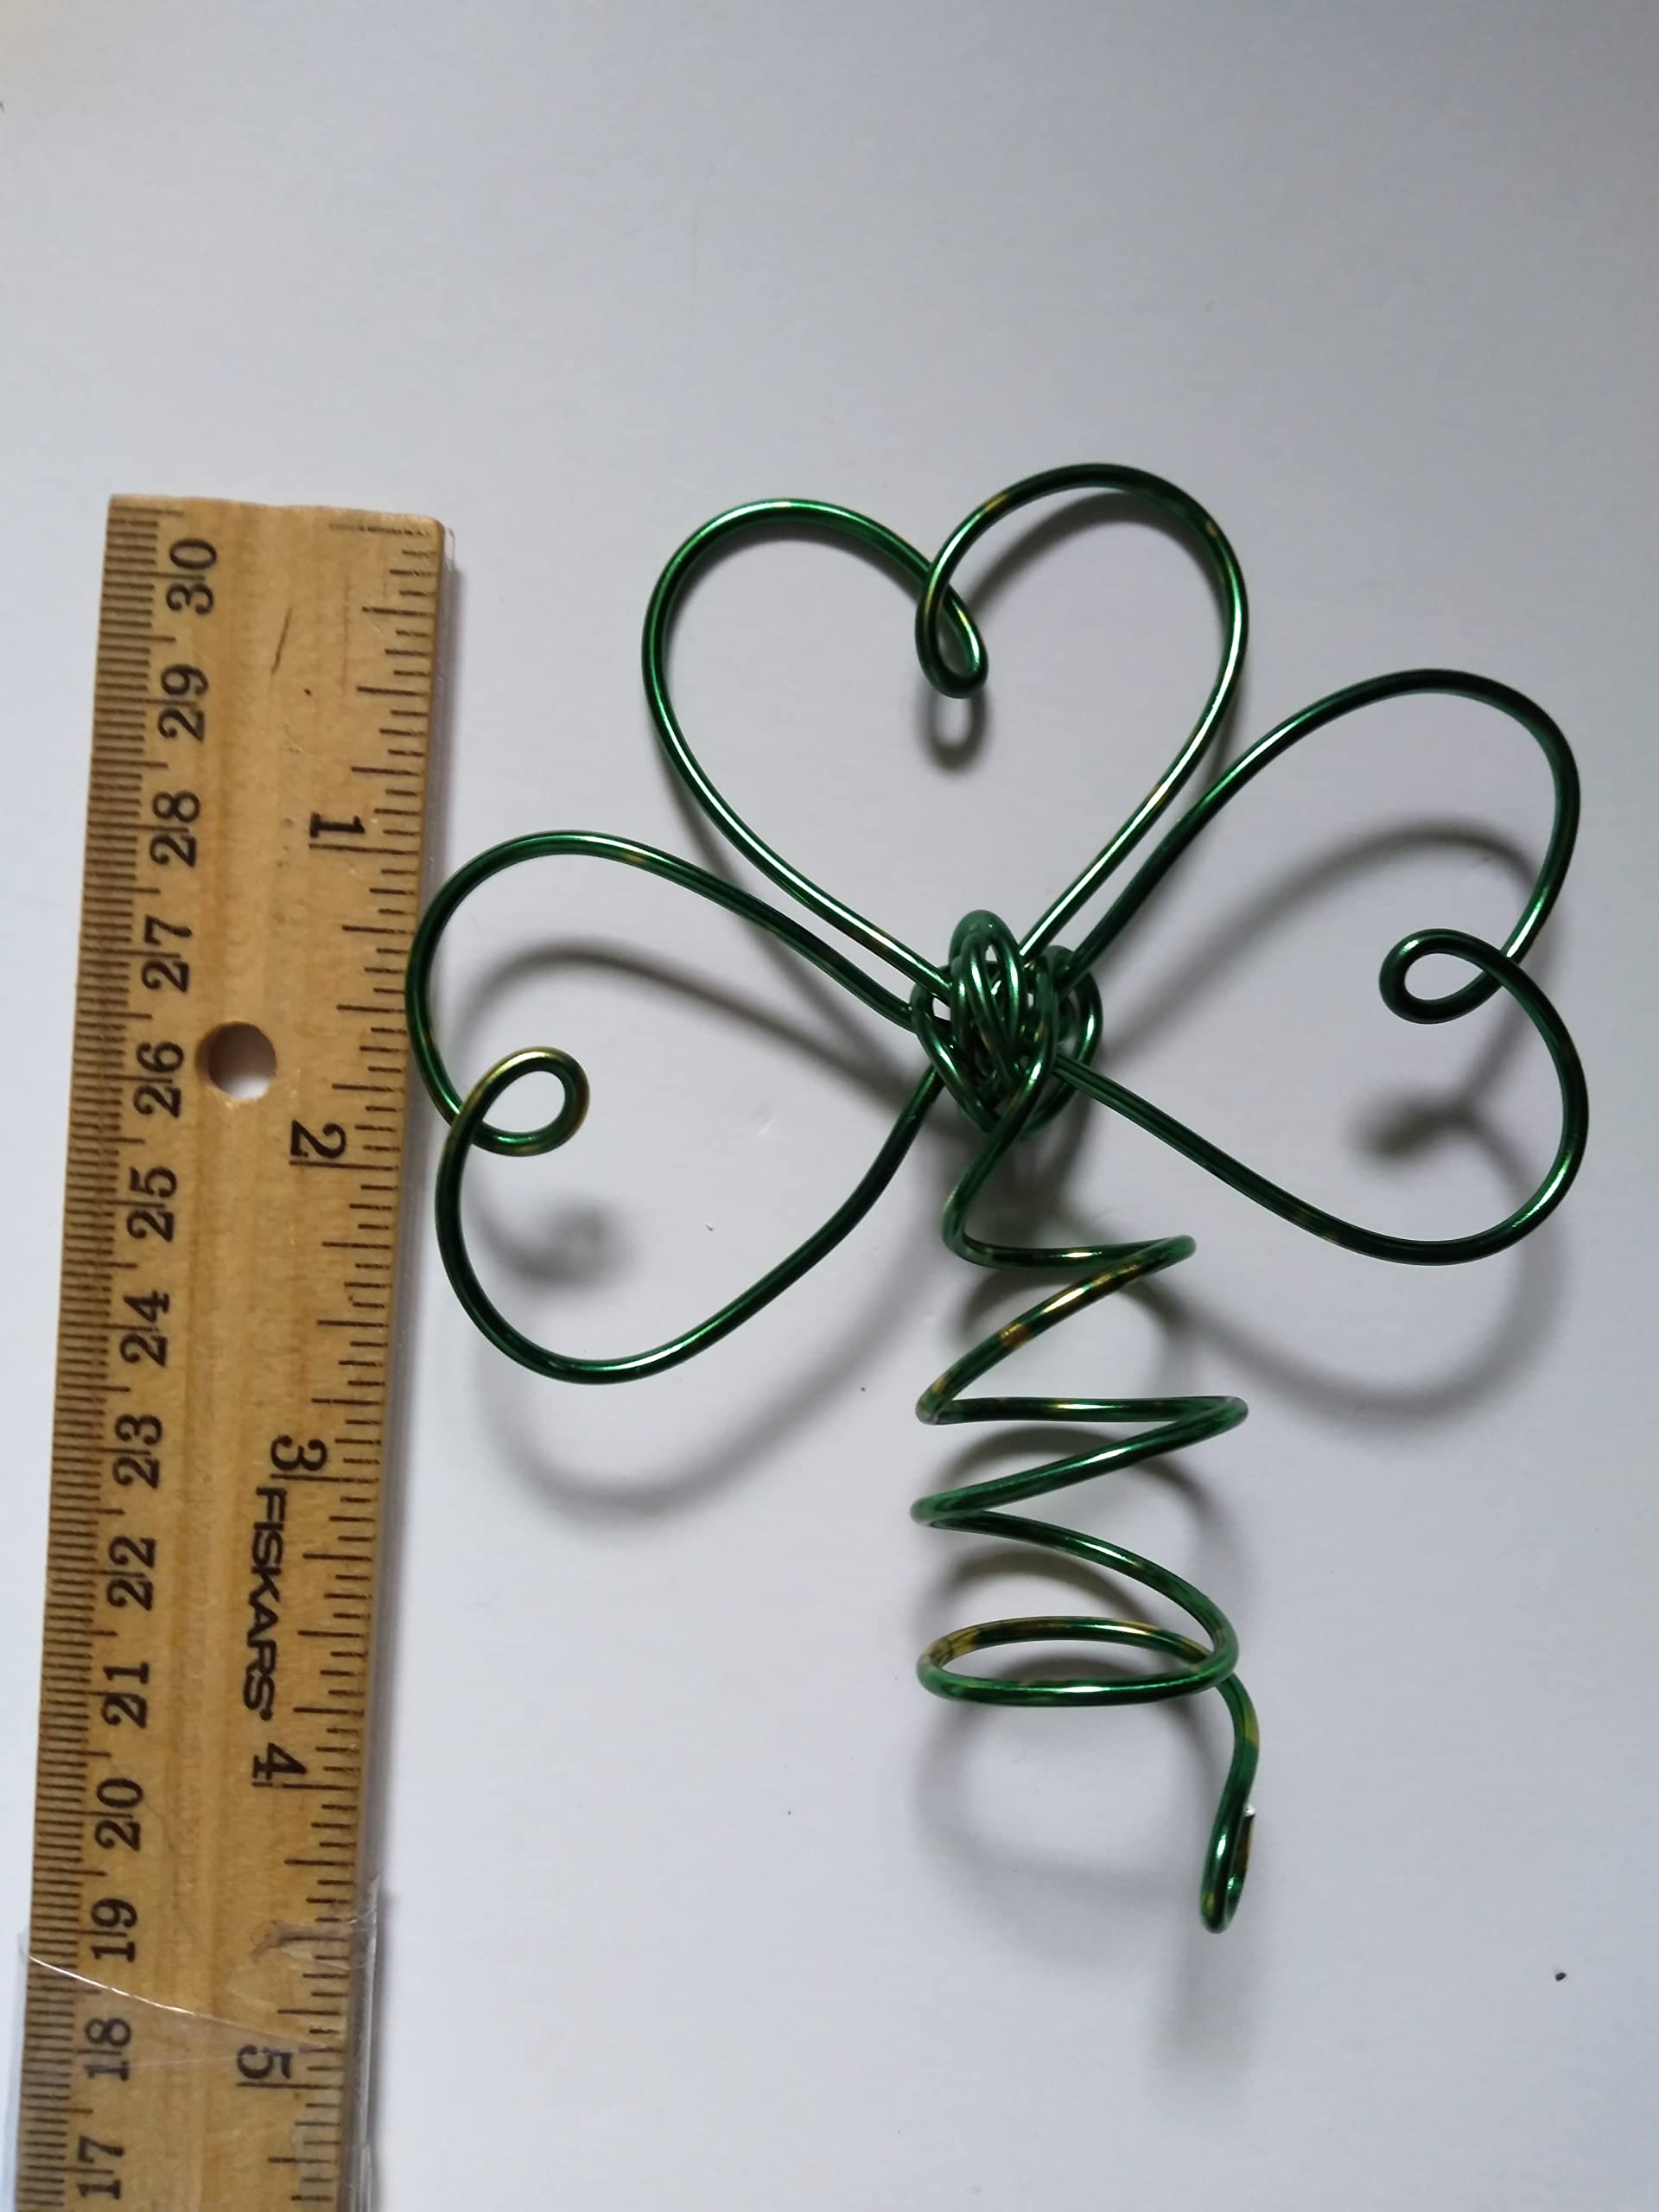 Green & Gold Shamrock Mini Tree Topper For Small St Patrick's Day Trees